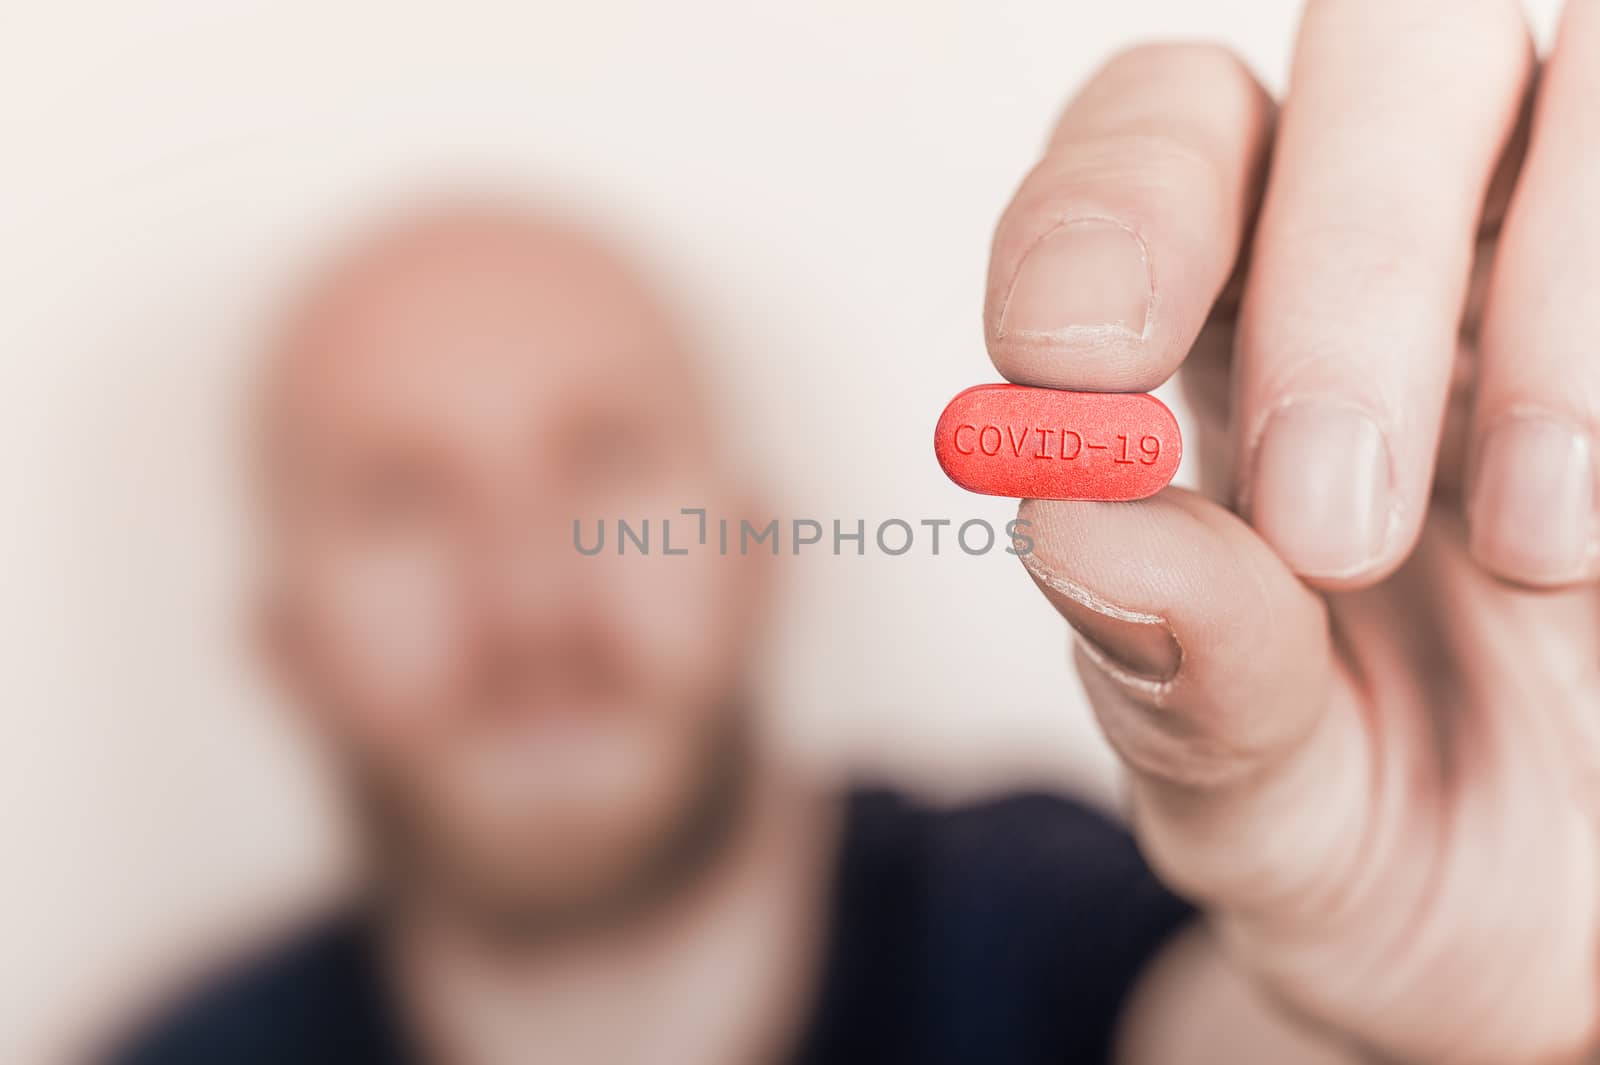 Illustration of a cure for Coronavirus Covid-19, man holding a pill with Covid-19 label.